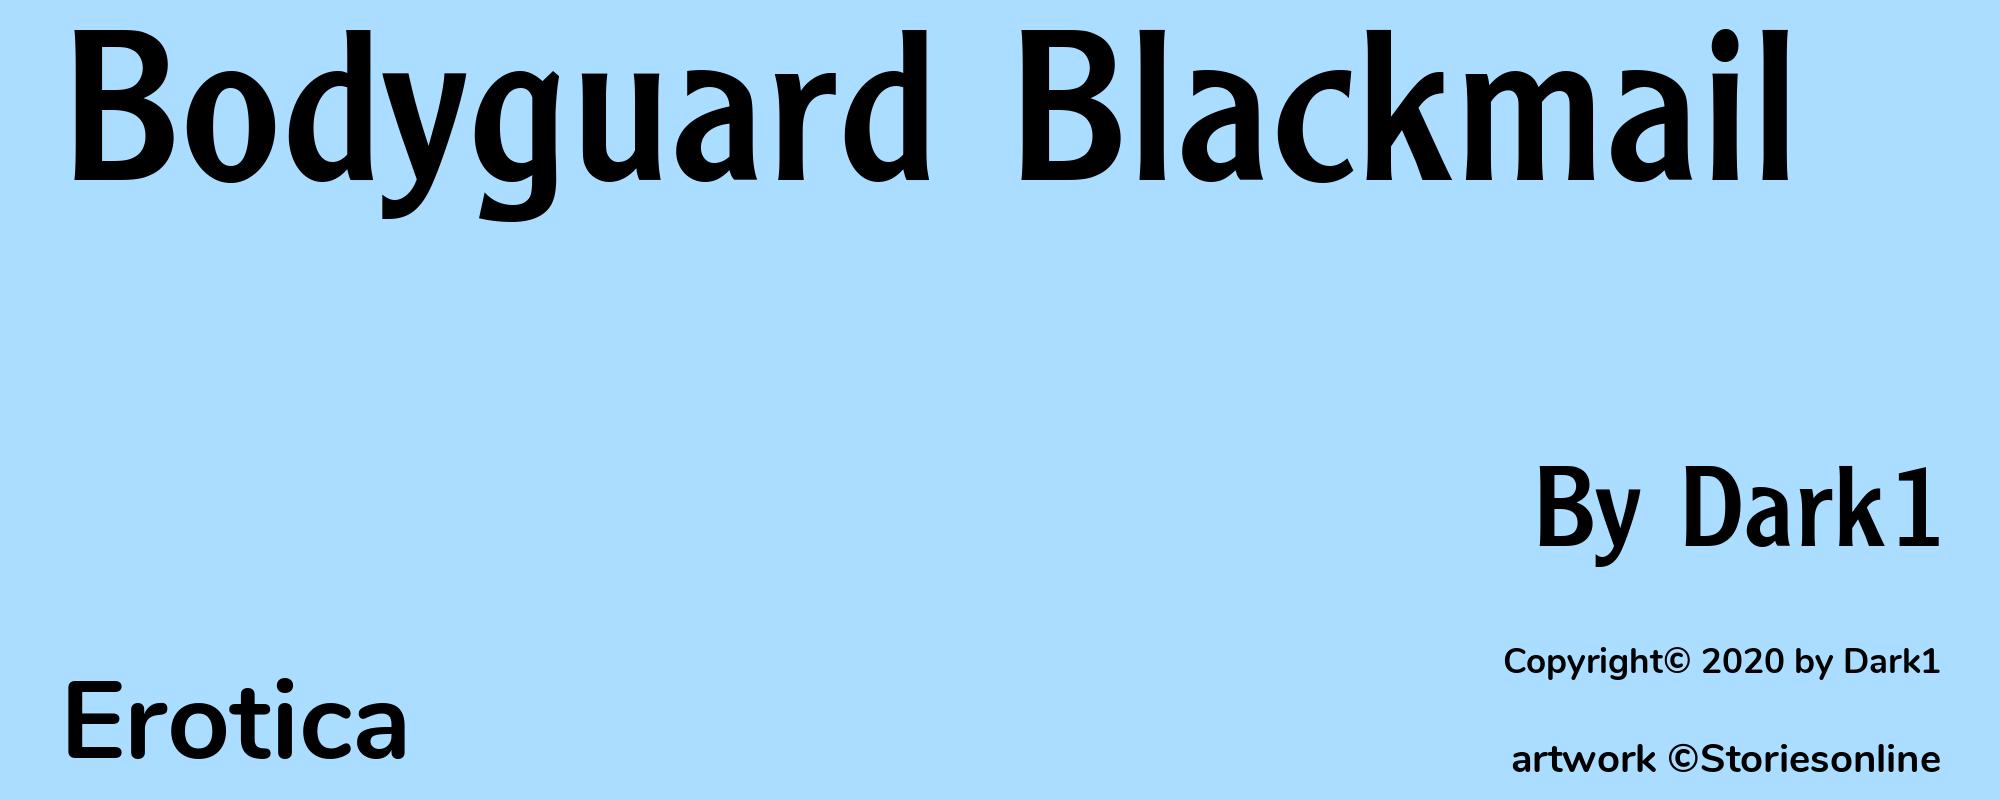 Bodyguard Blackmail - Cover